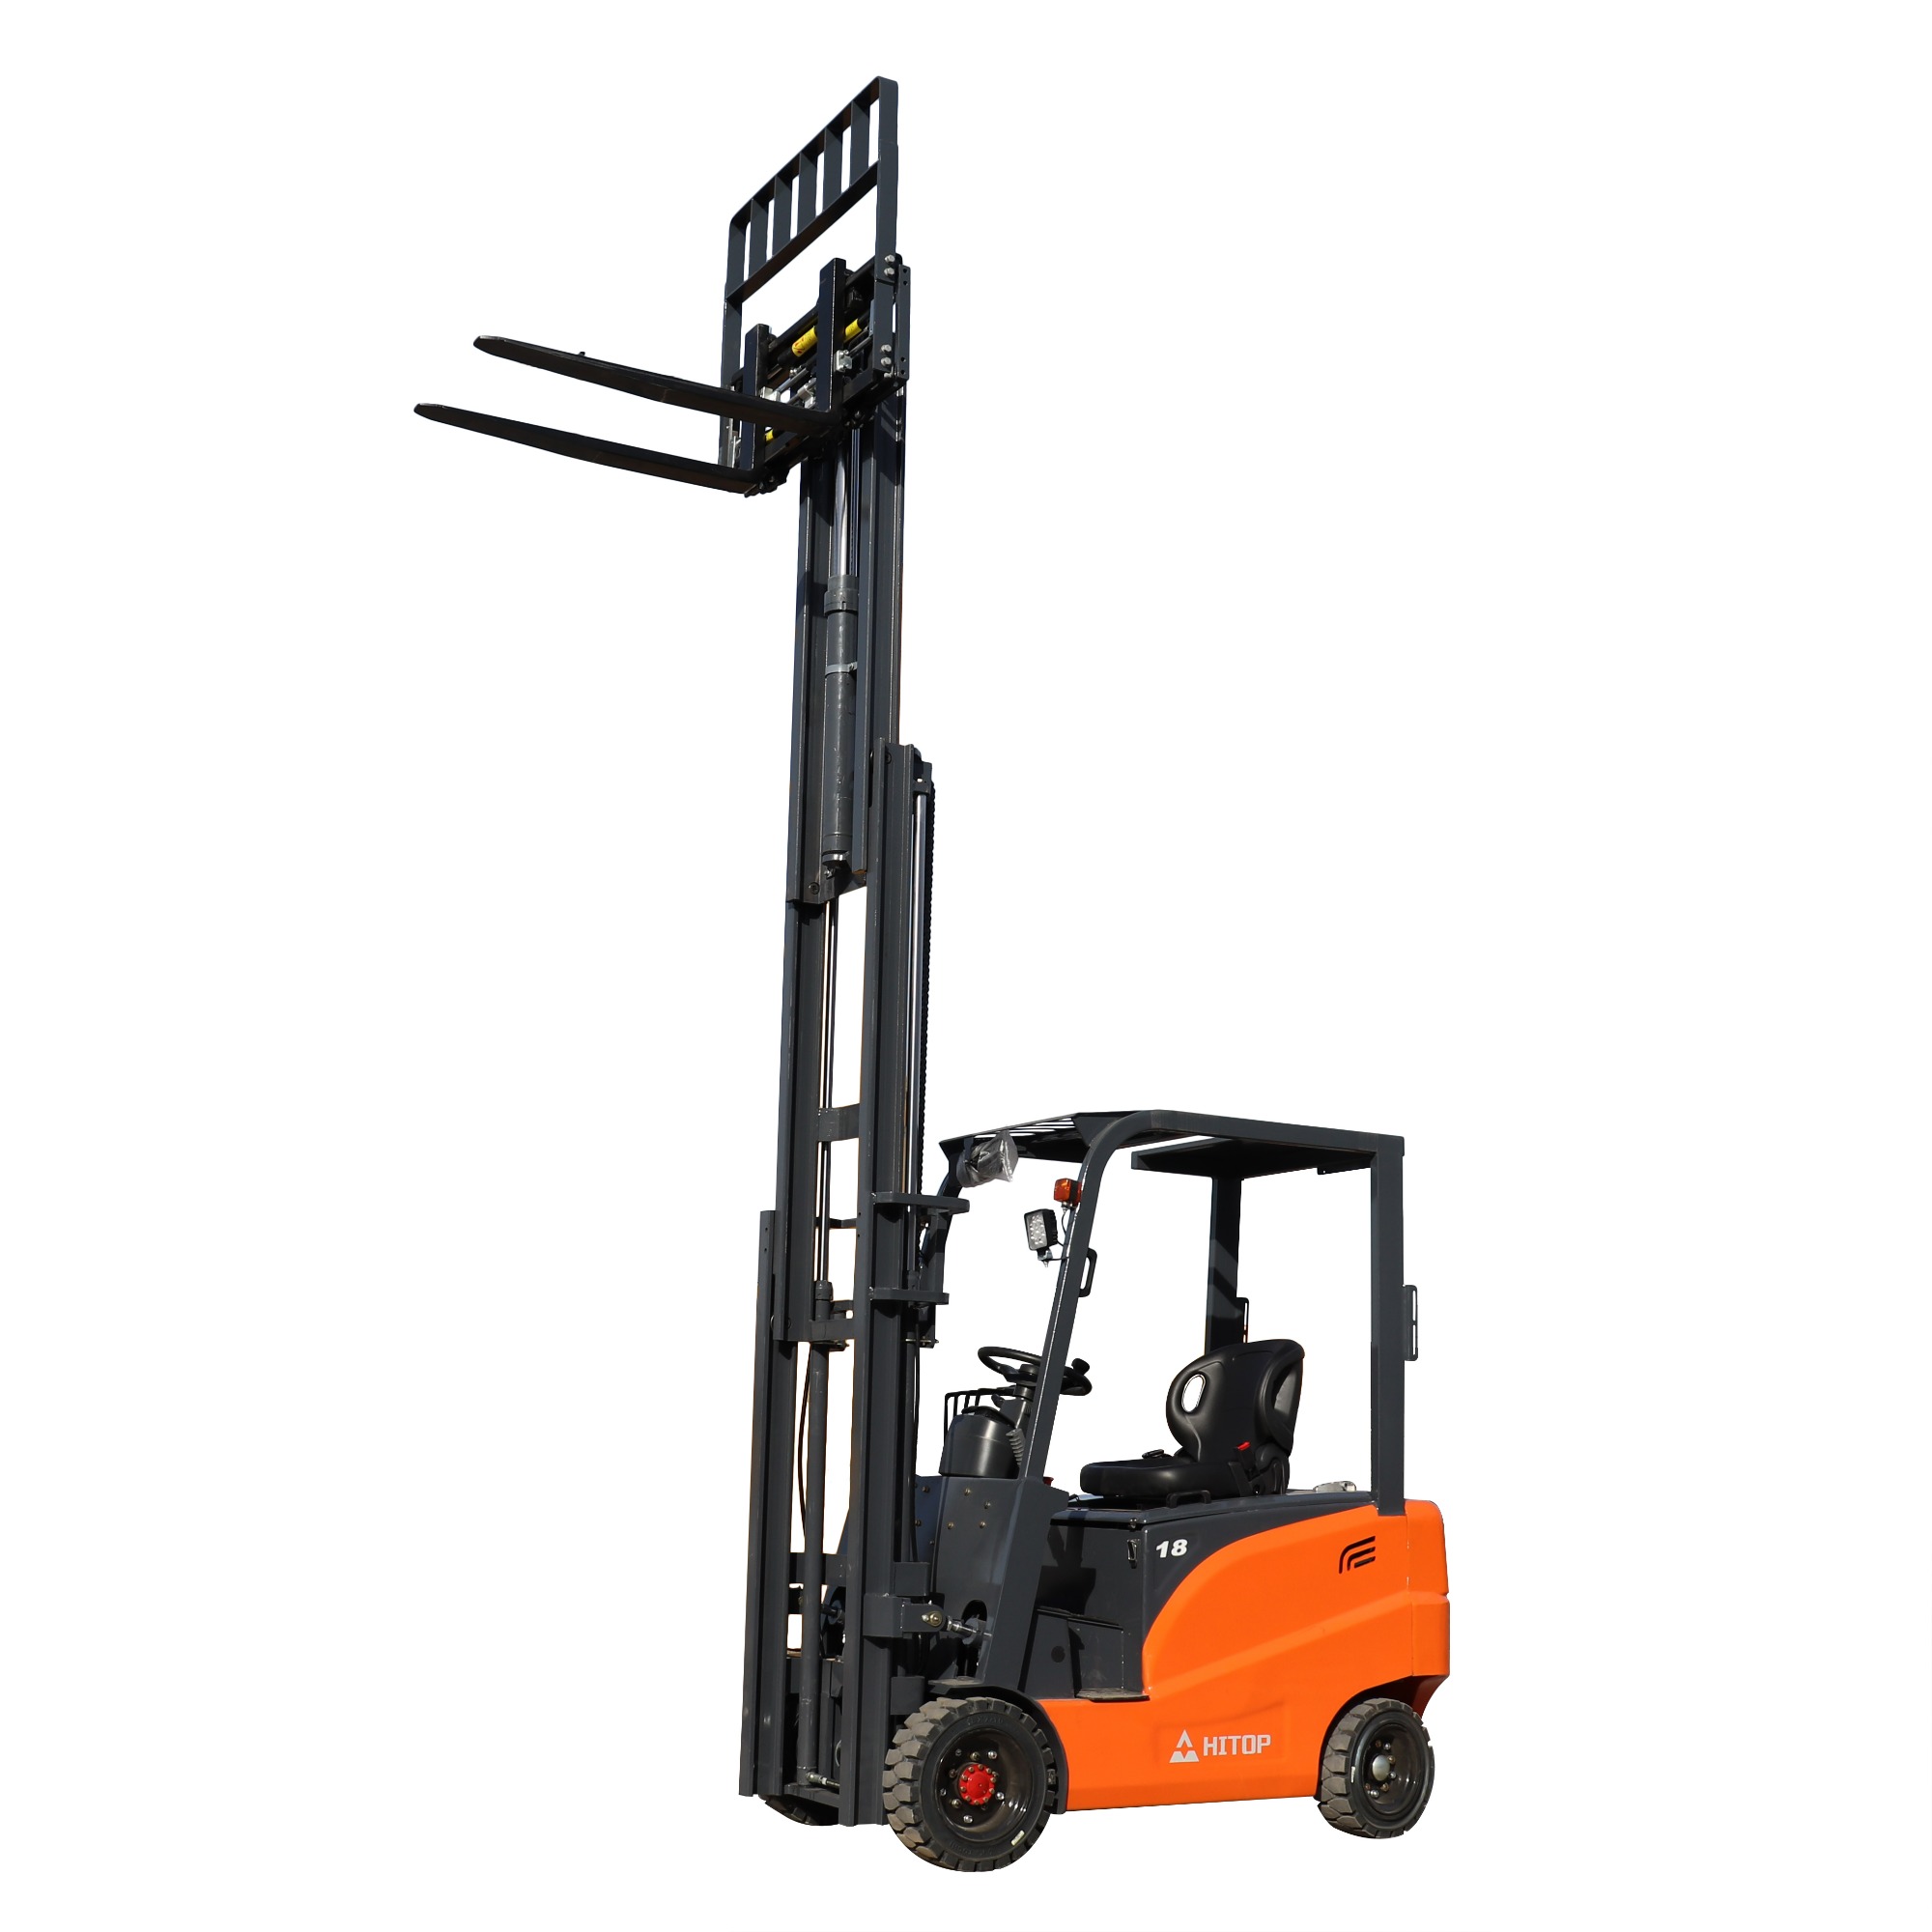 Some safety tips when driving forklift